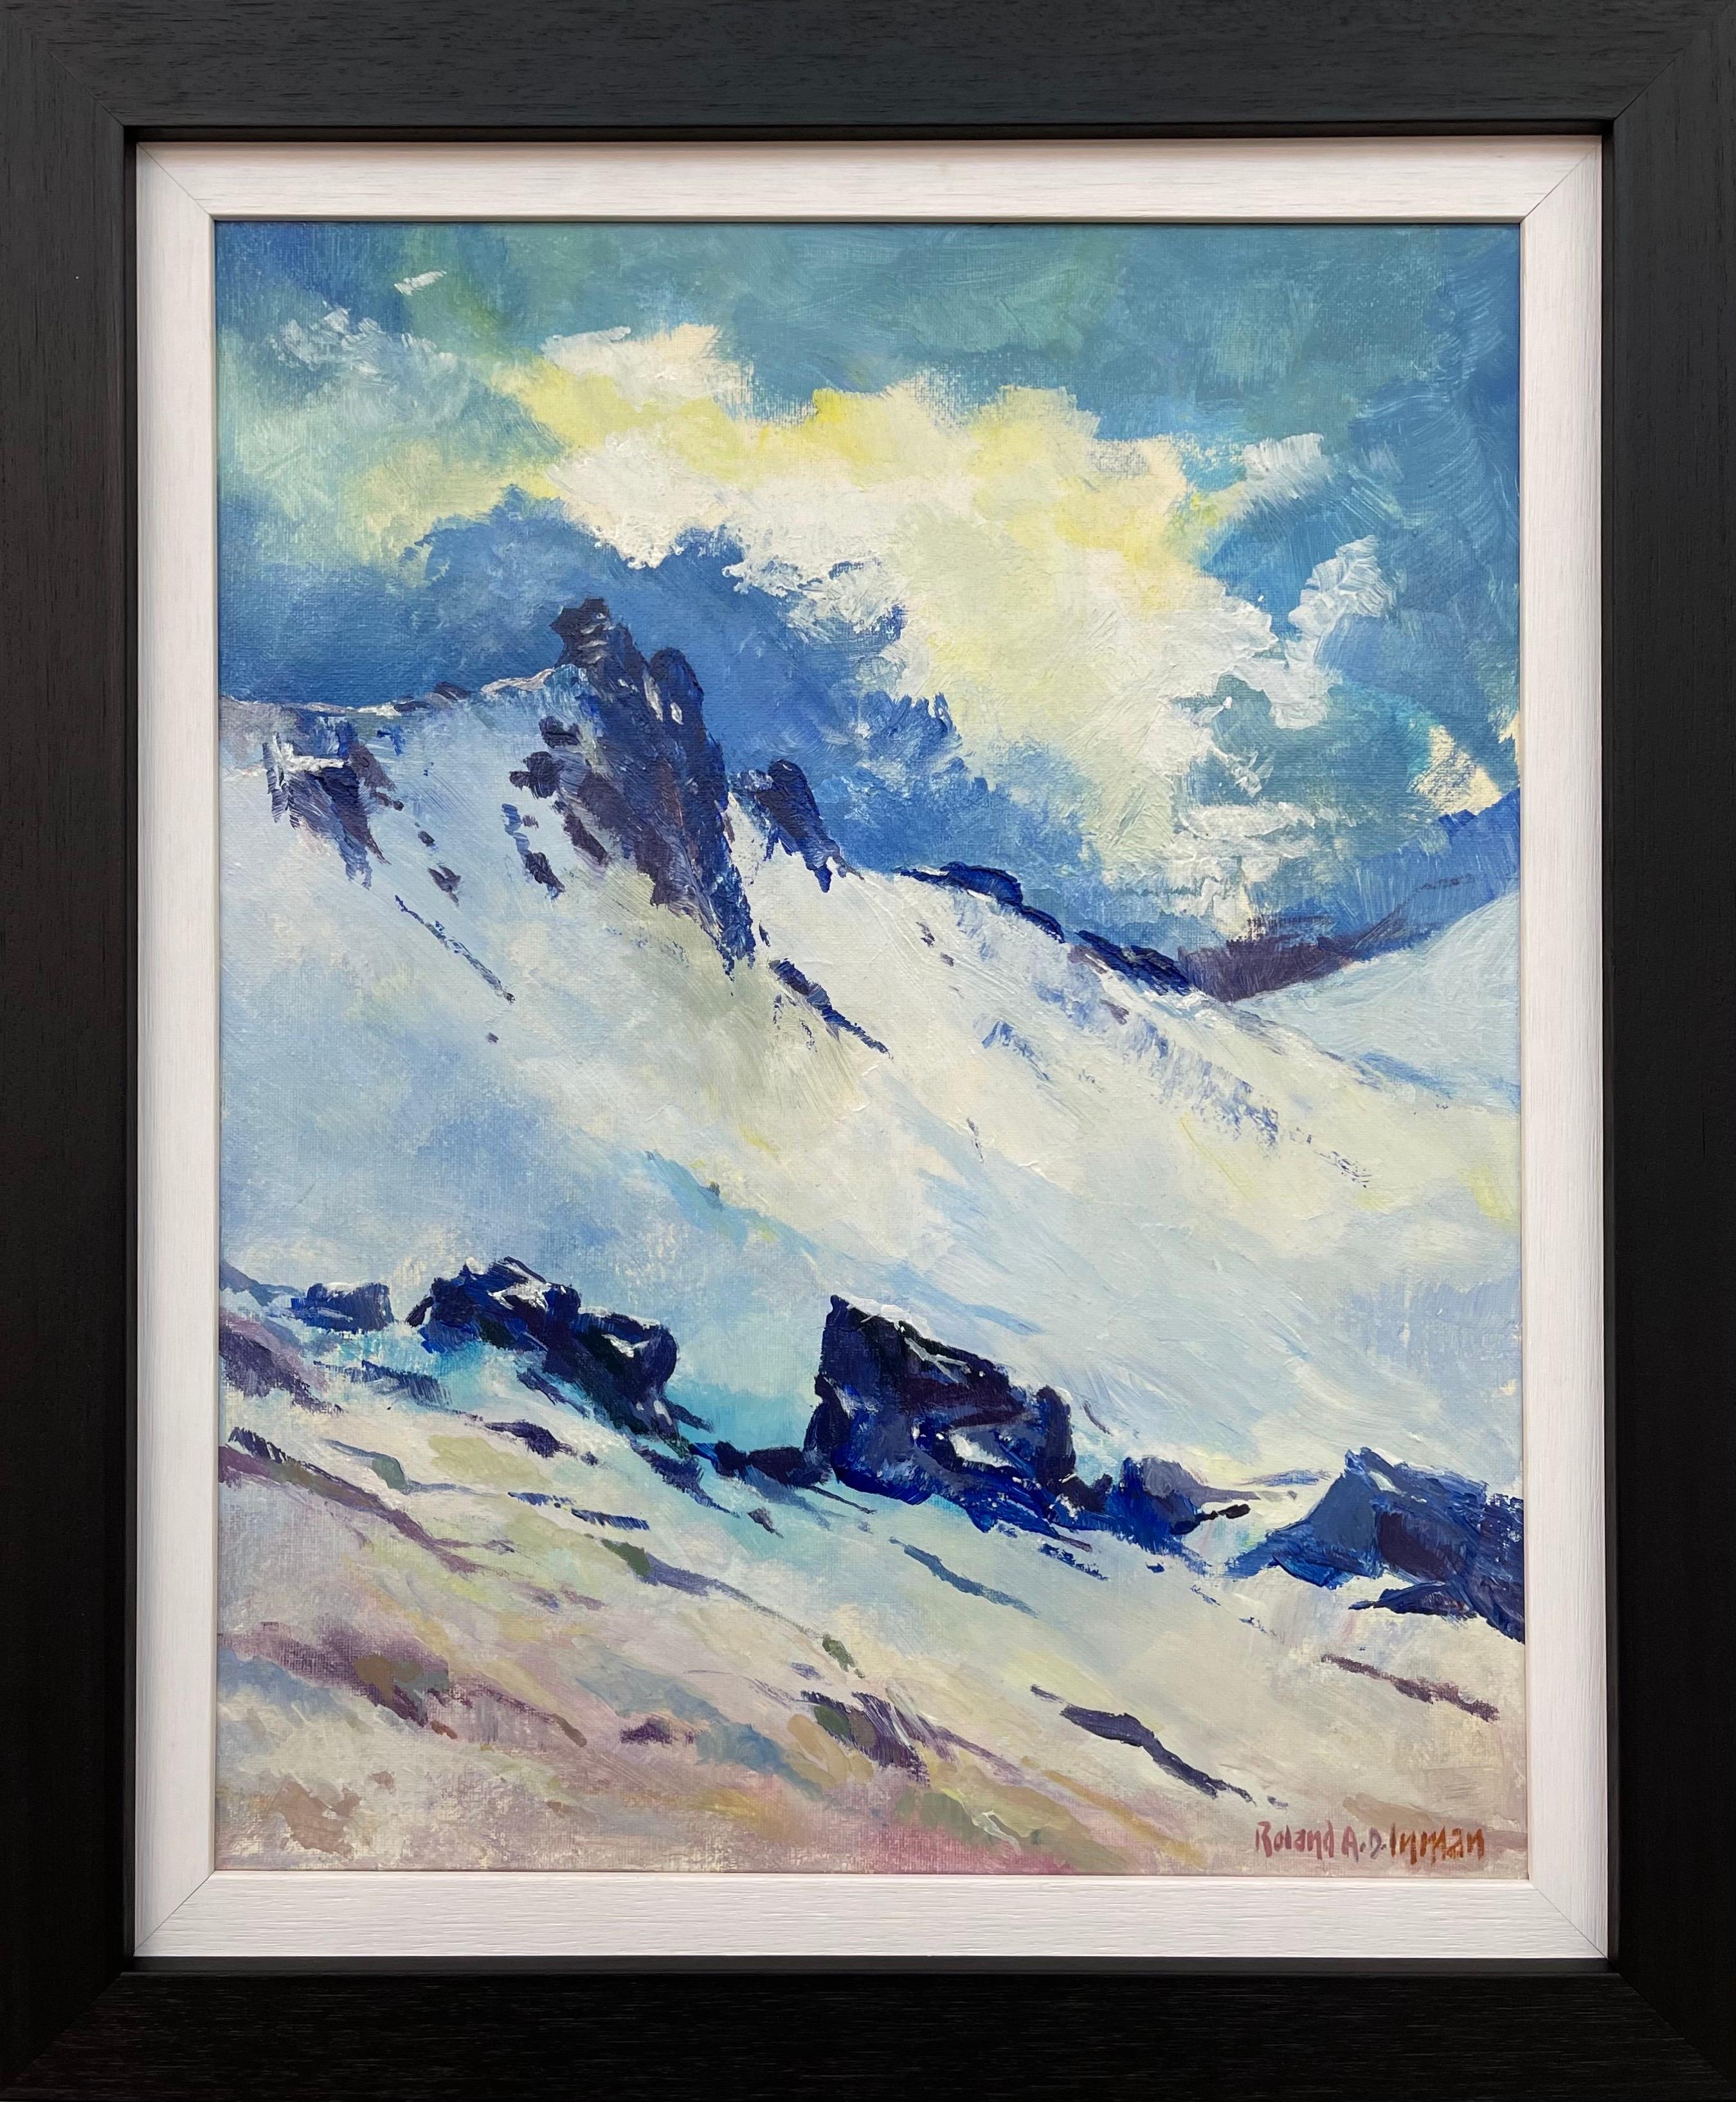 Roland A.D. Inman Figurative Painting - Blue & White Oil Painting of the Mourne Mountains Ireland by Modern Irish Artist